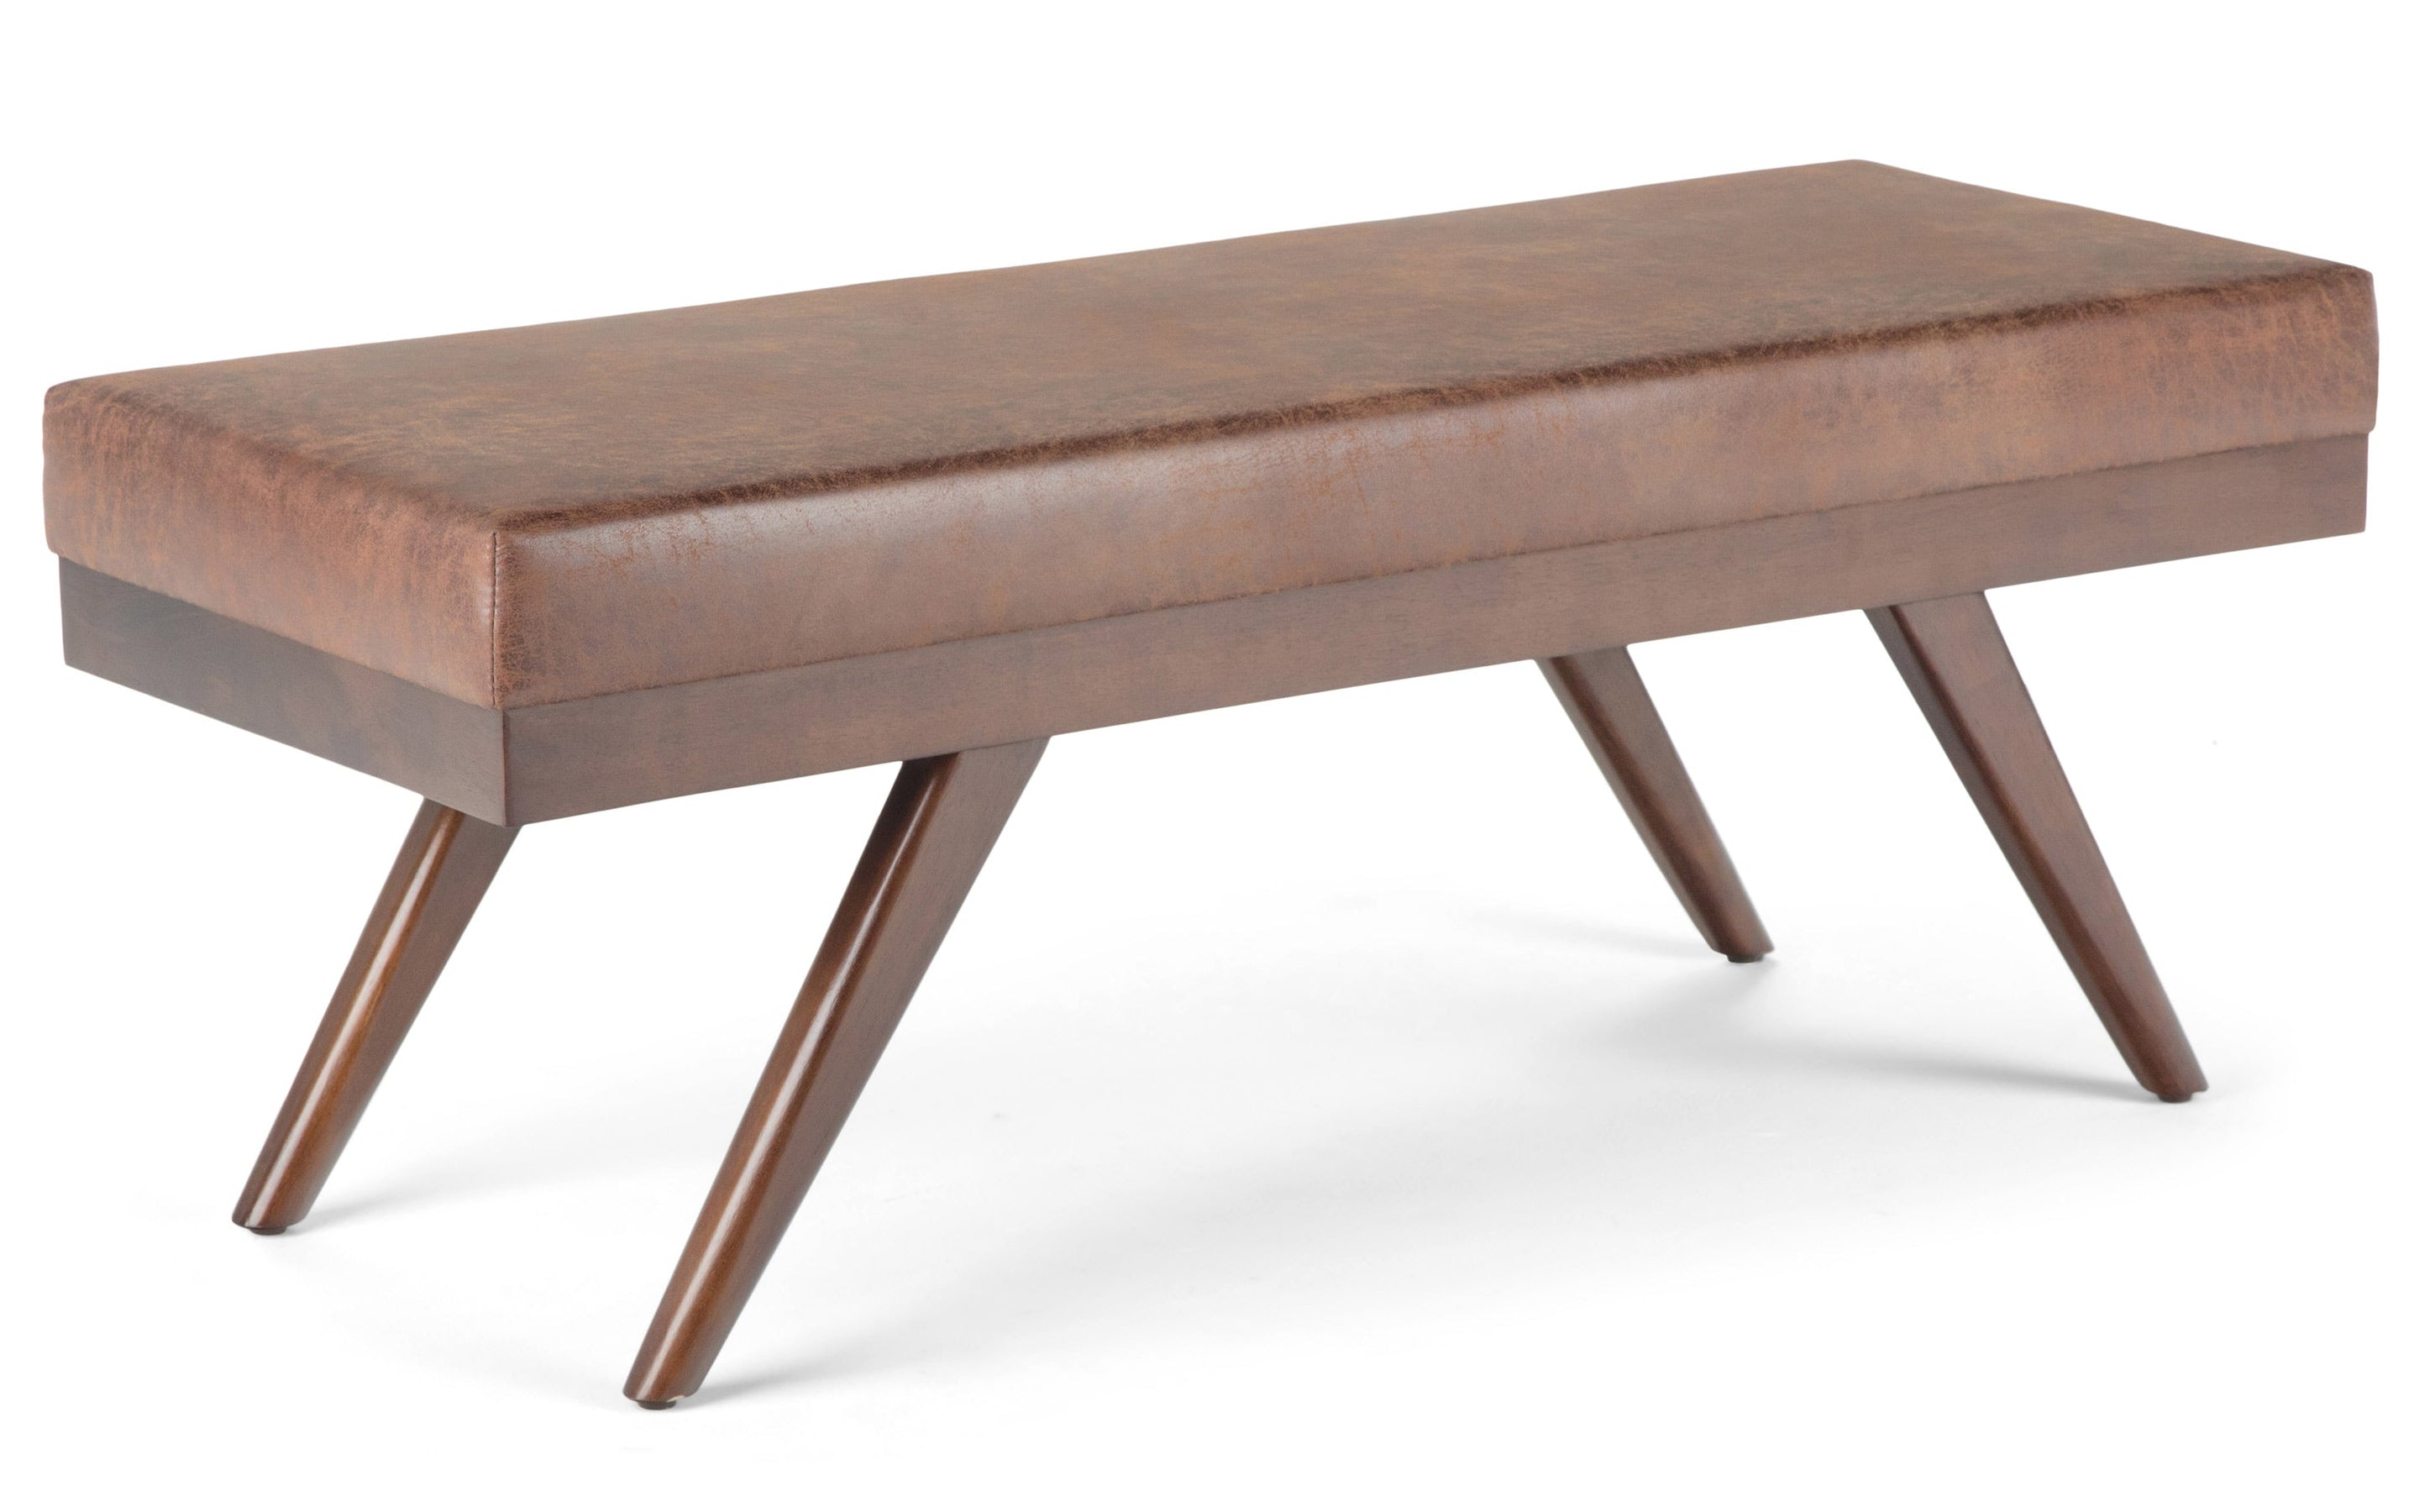 Distressed Umber Brown Distressed Vegan Leather | Chanelle Mid Century Ottoman Bench